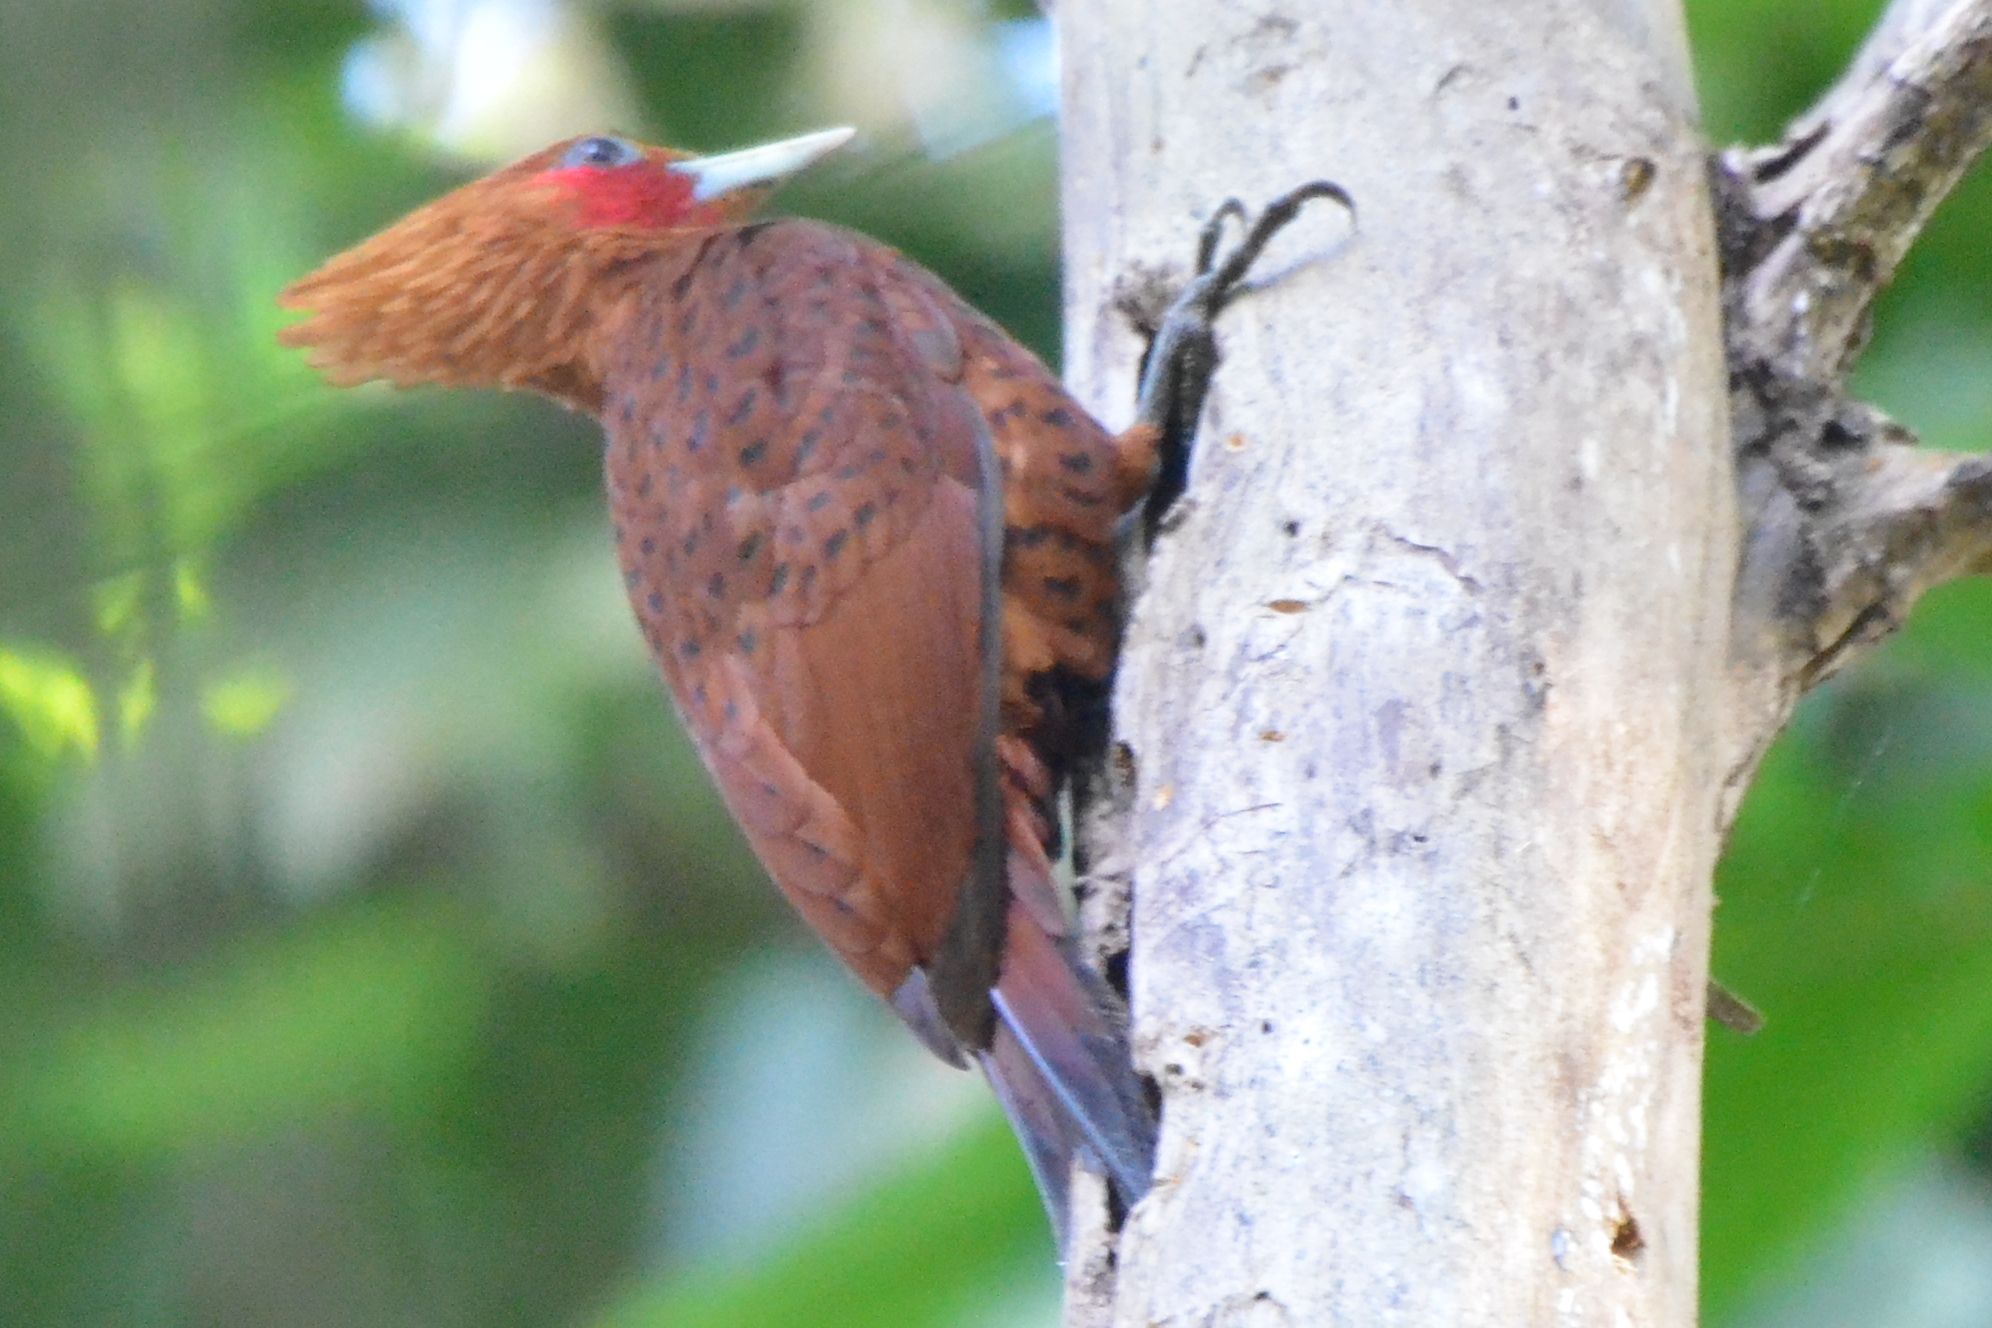 Click picture to see more Chestnut-colored Woodpeckers.